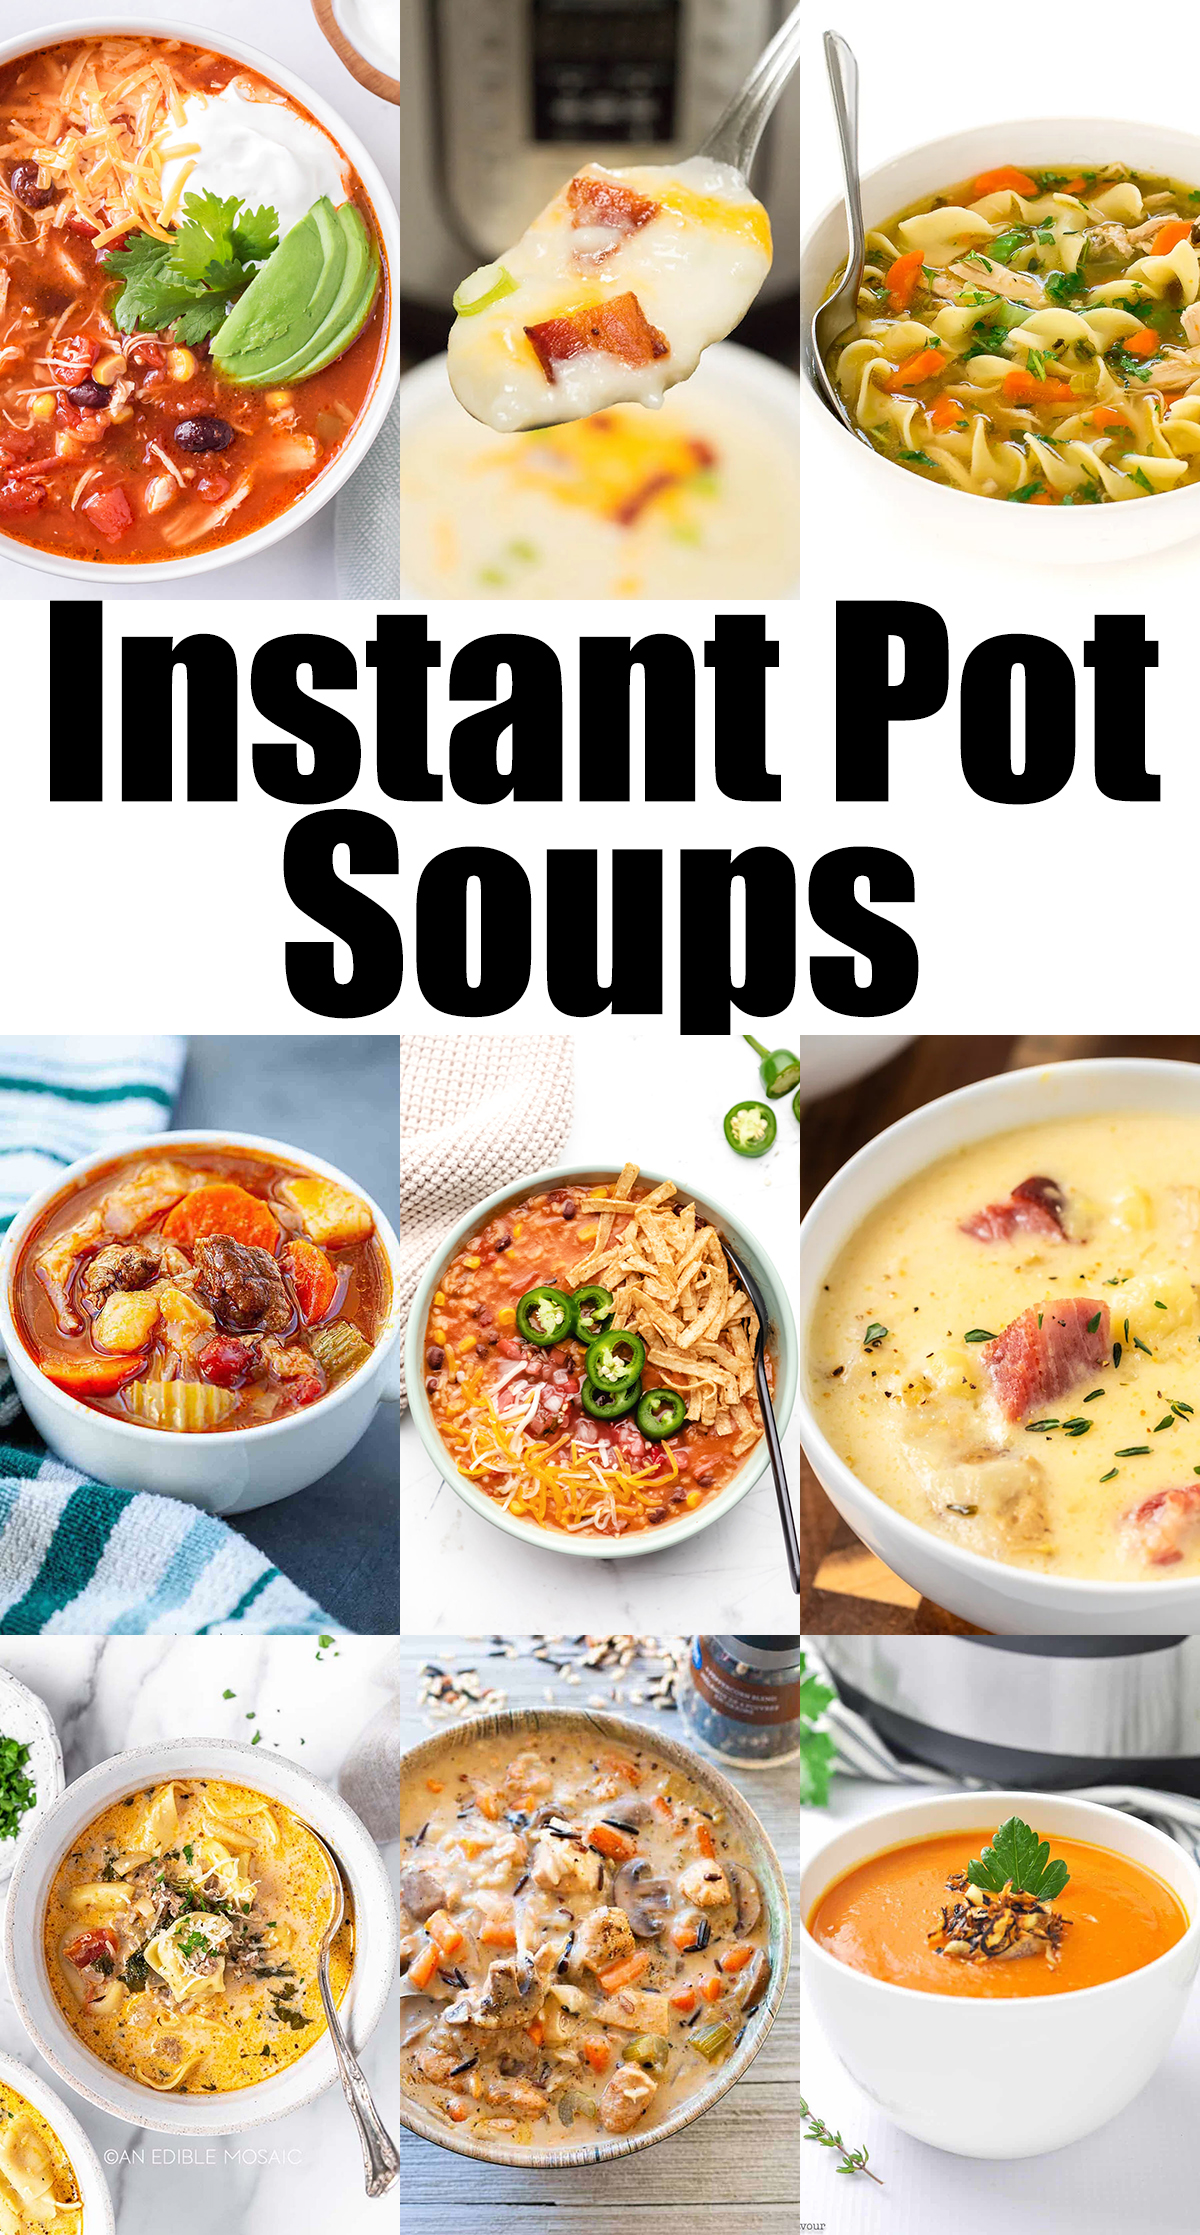 A nine photo collage of soups made in the Instant Pot with text reading "Instant Pot Soups" in the middle.